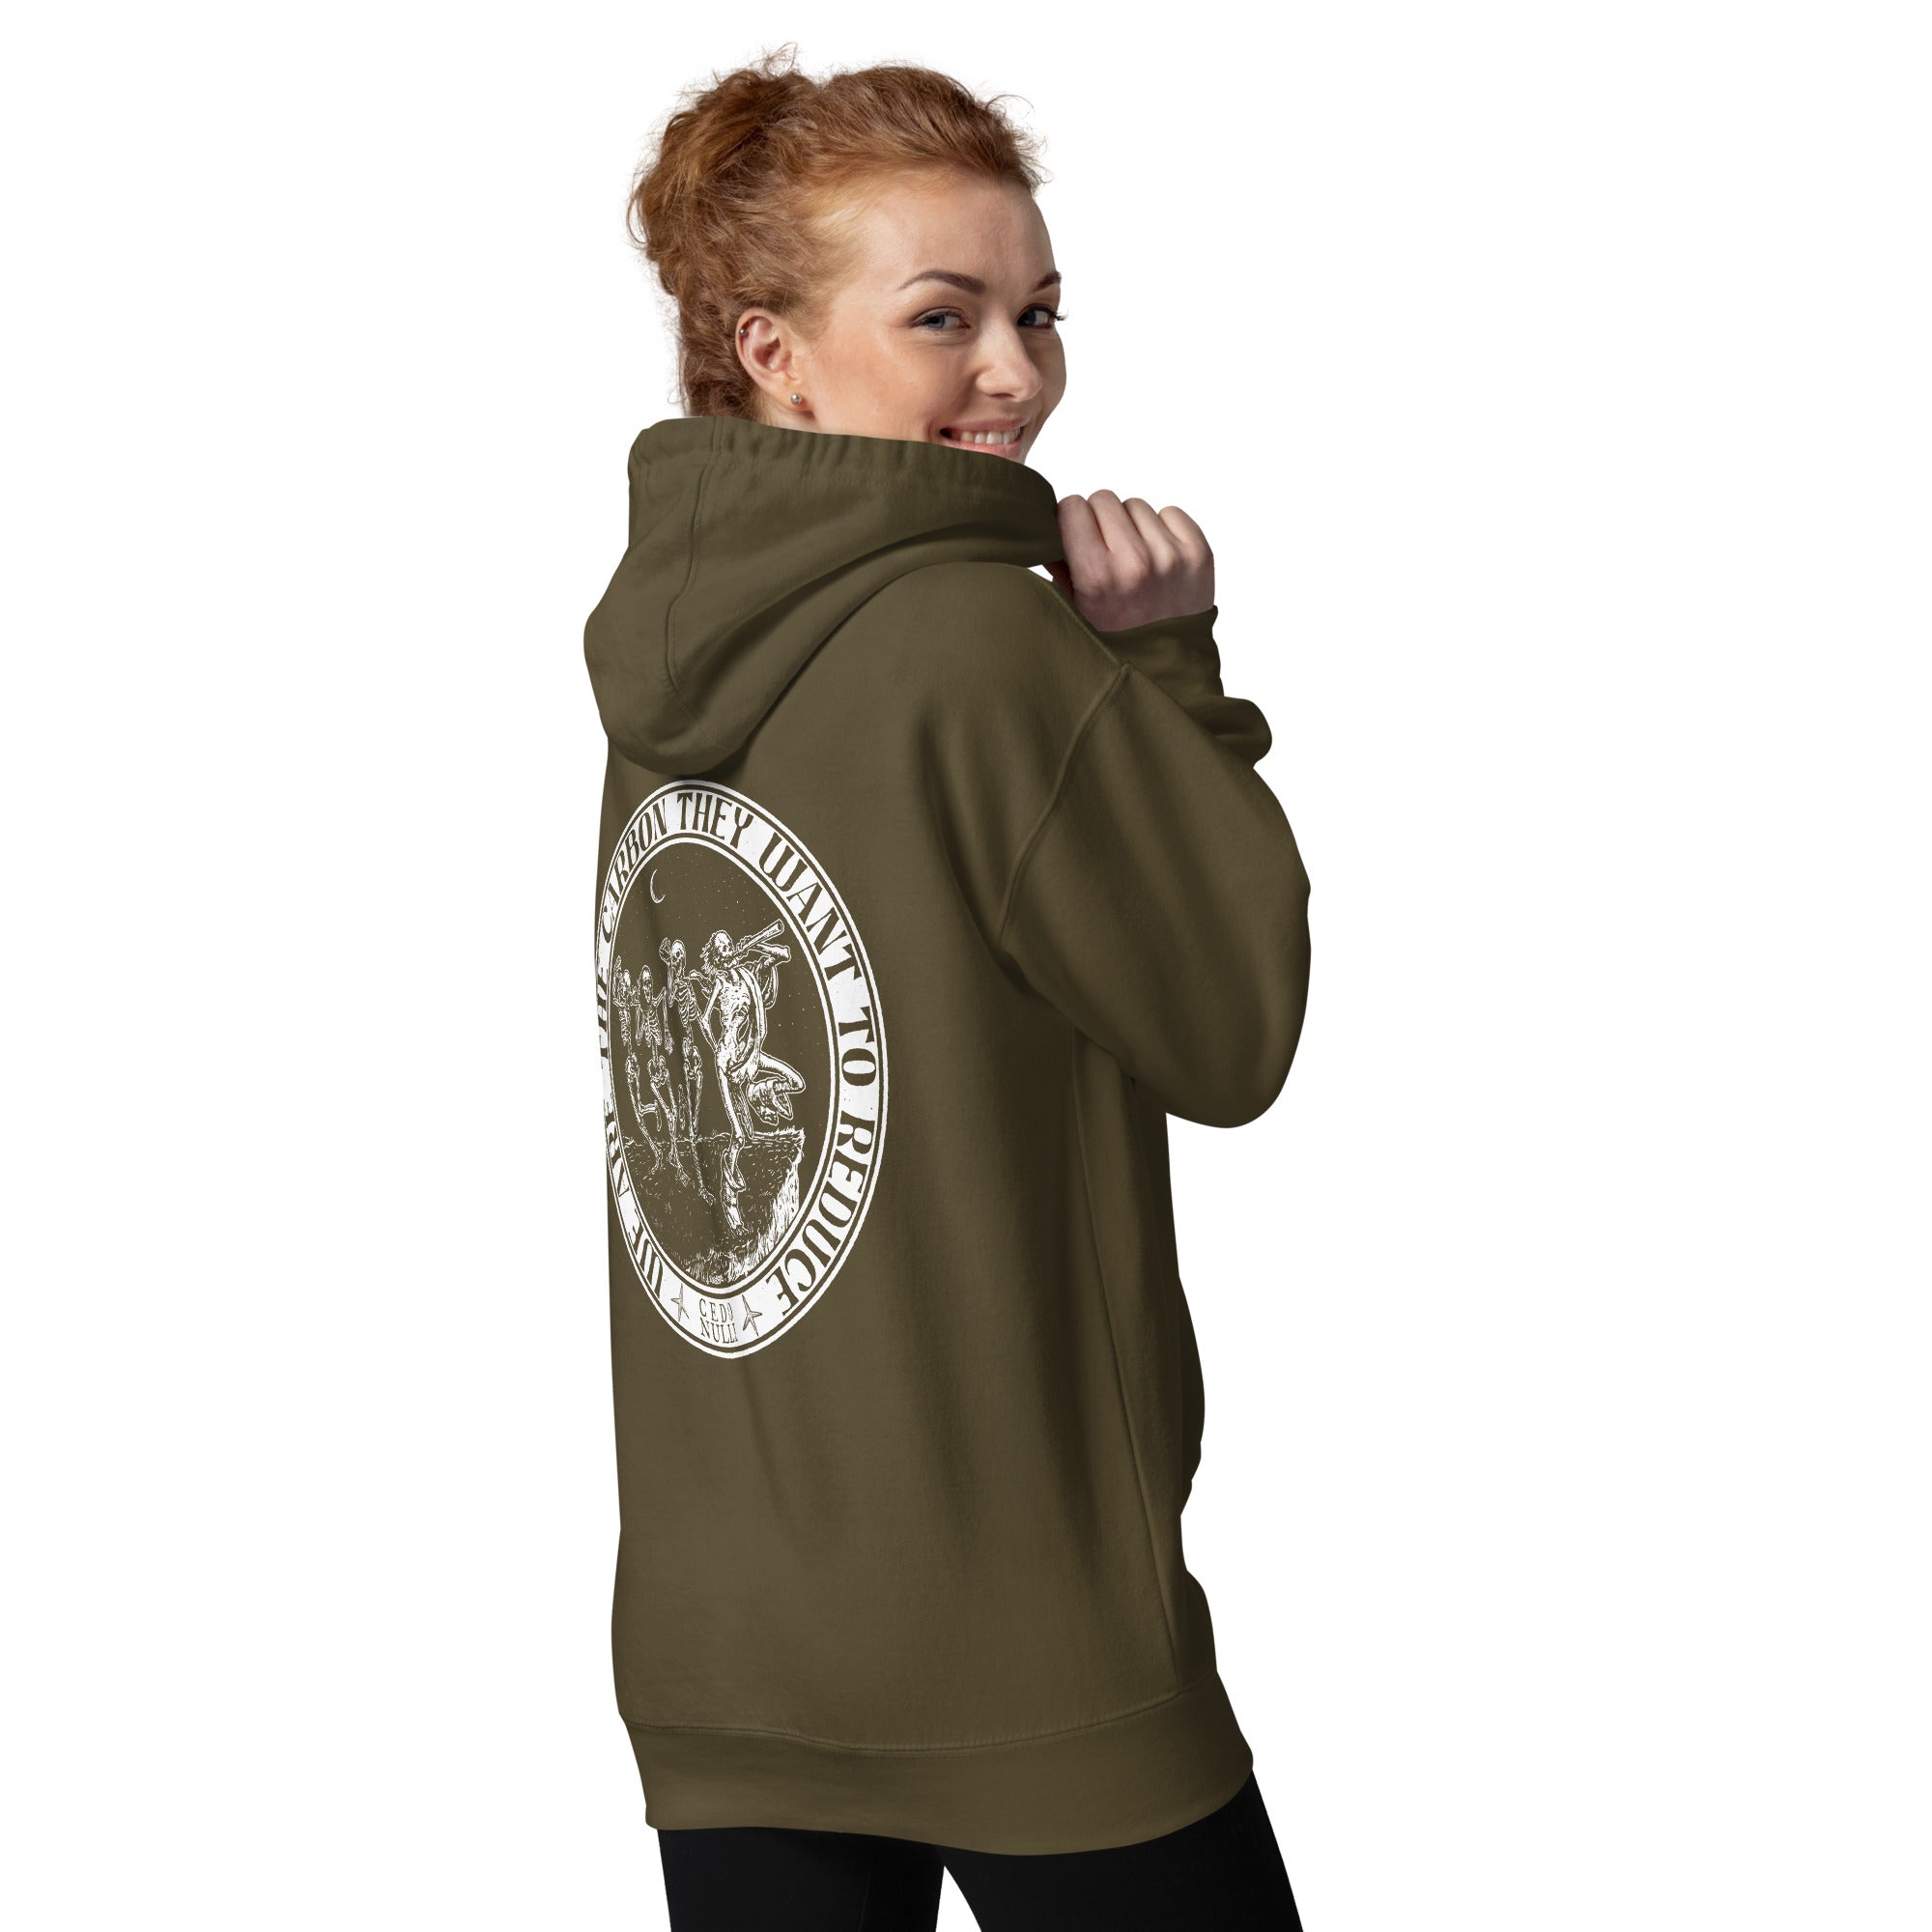 We Are the Carbon They Want To Reduce Unisex Hoodie